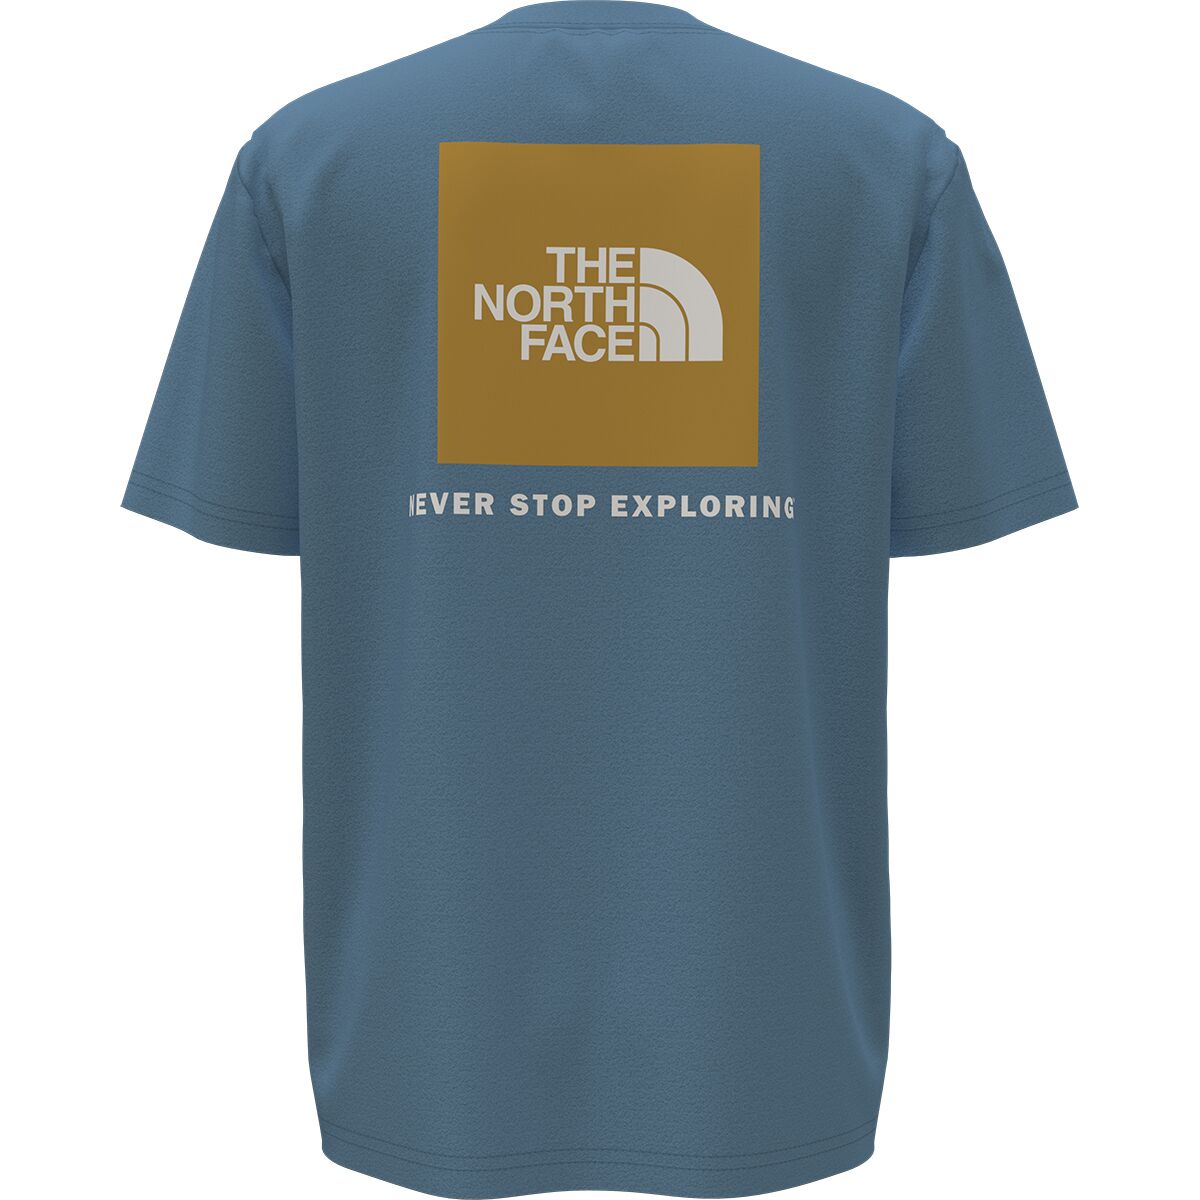 The North Face Graphic T-Shirt - Short-Sleeve - Boys'